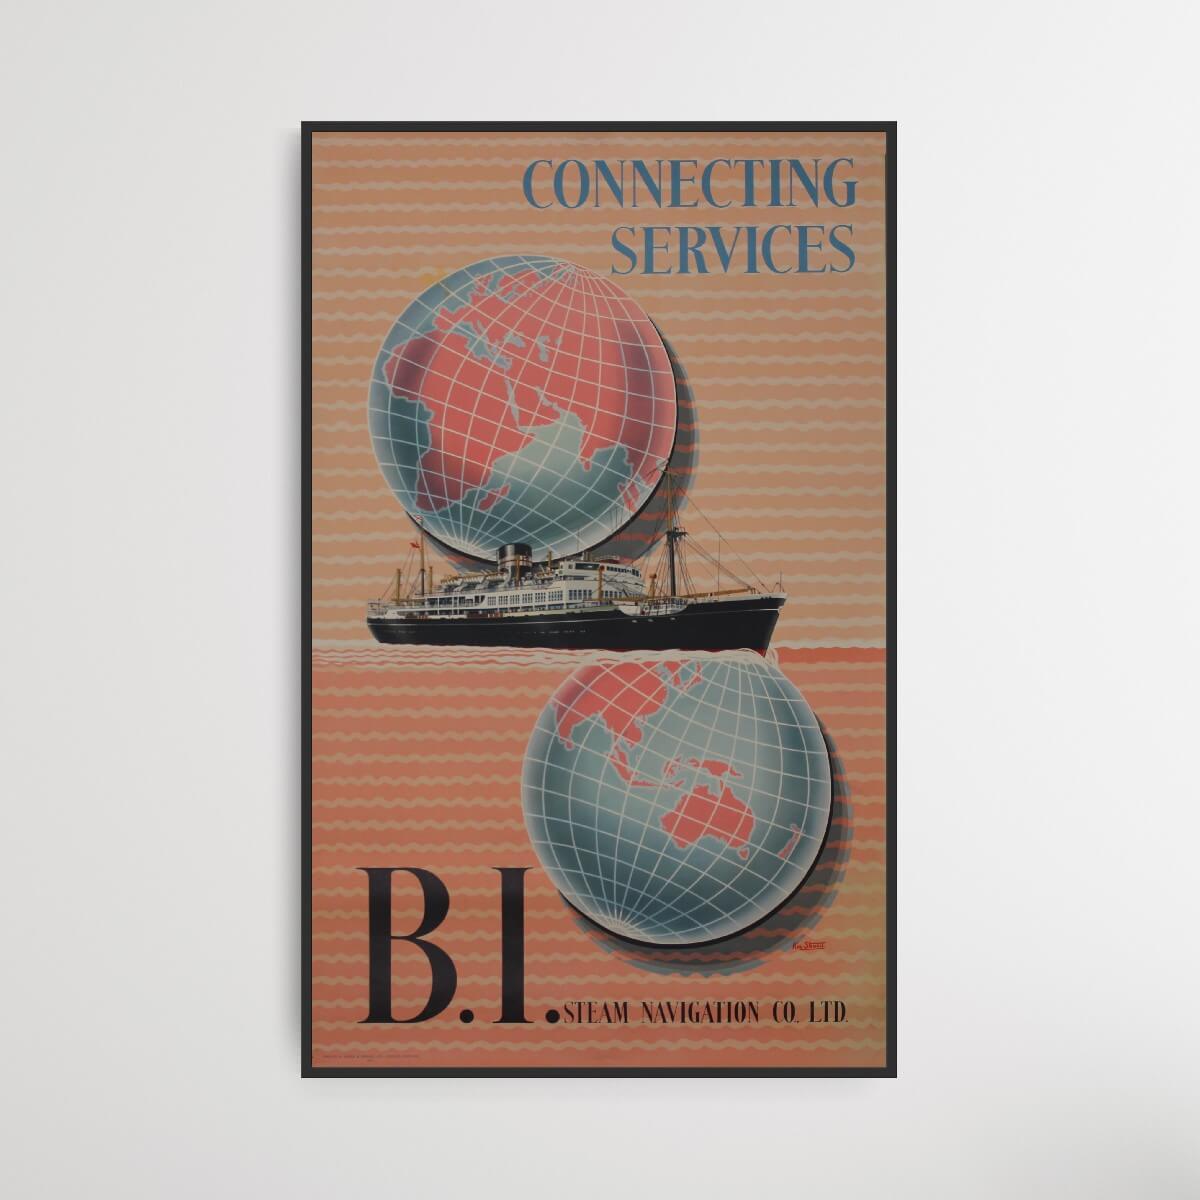 Connecting Services - B.I. Steam Navigation